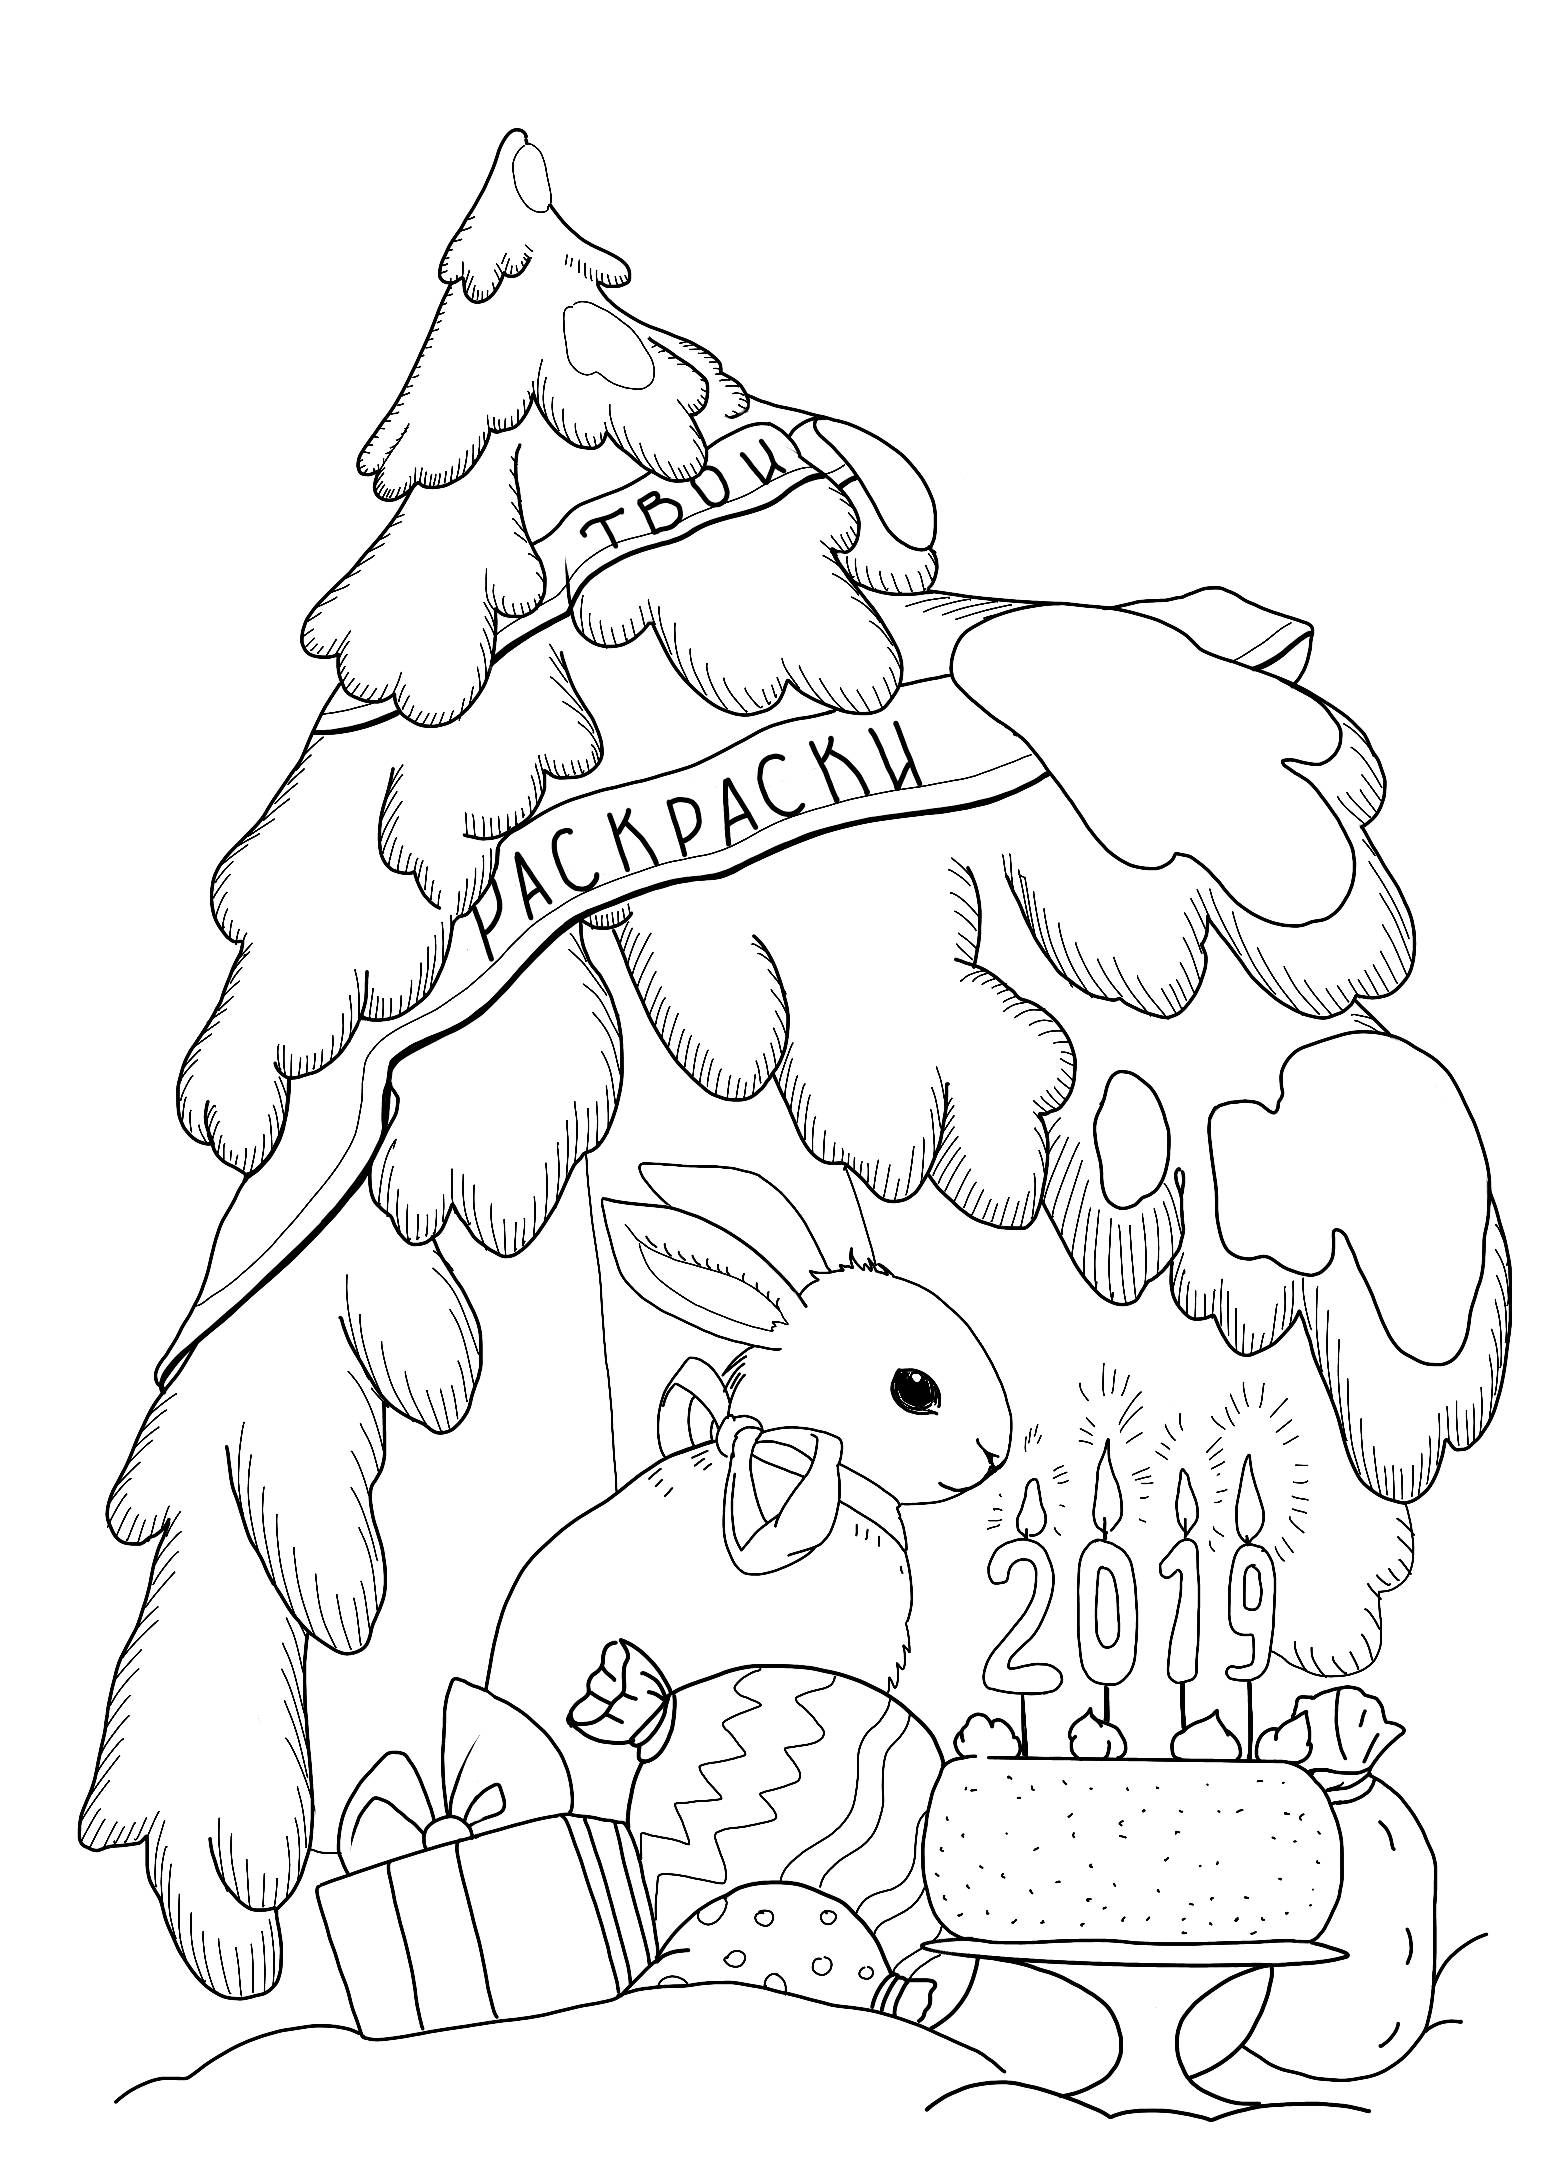 Your coloring pages